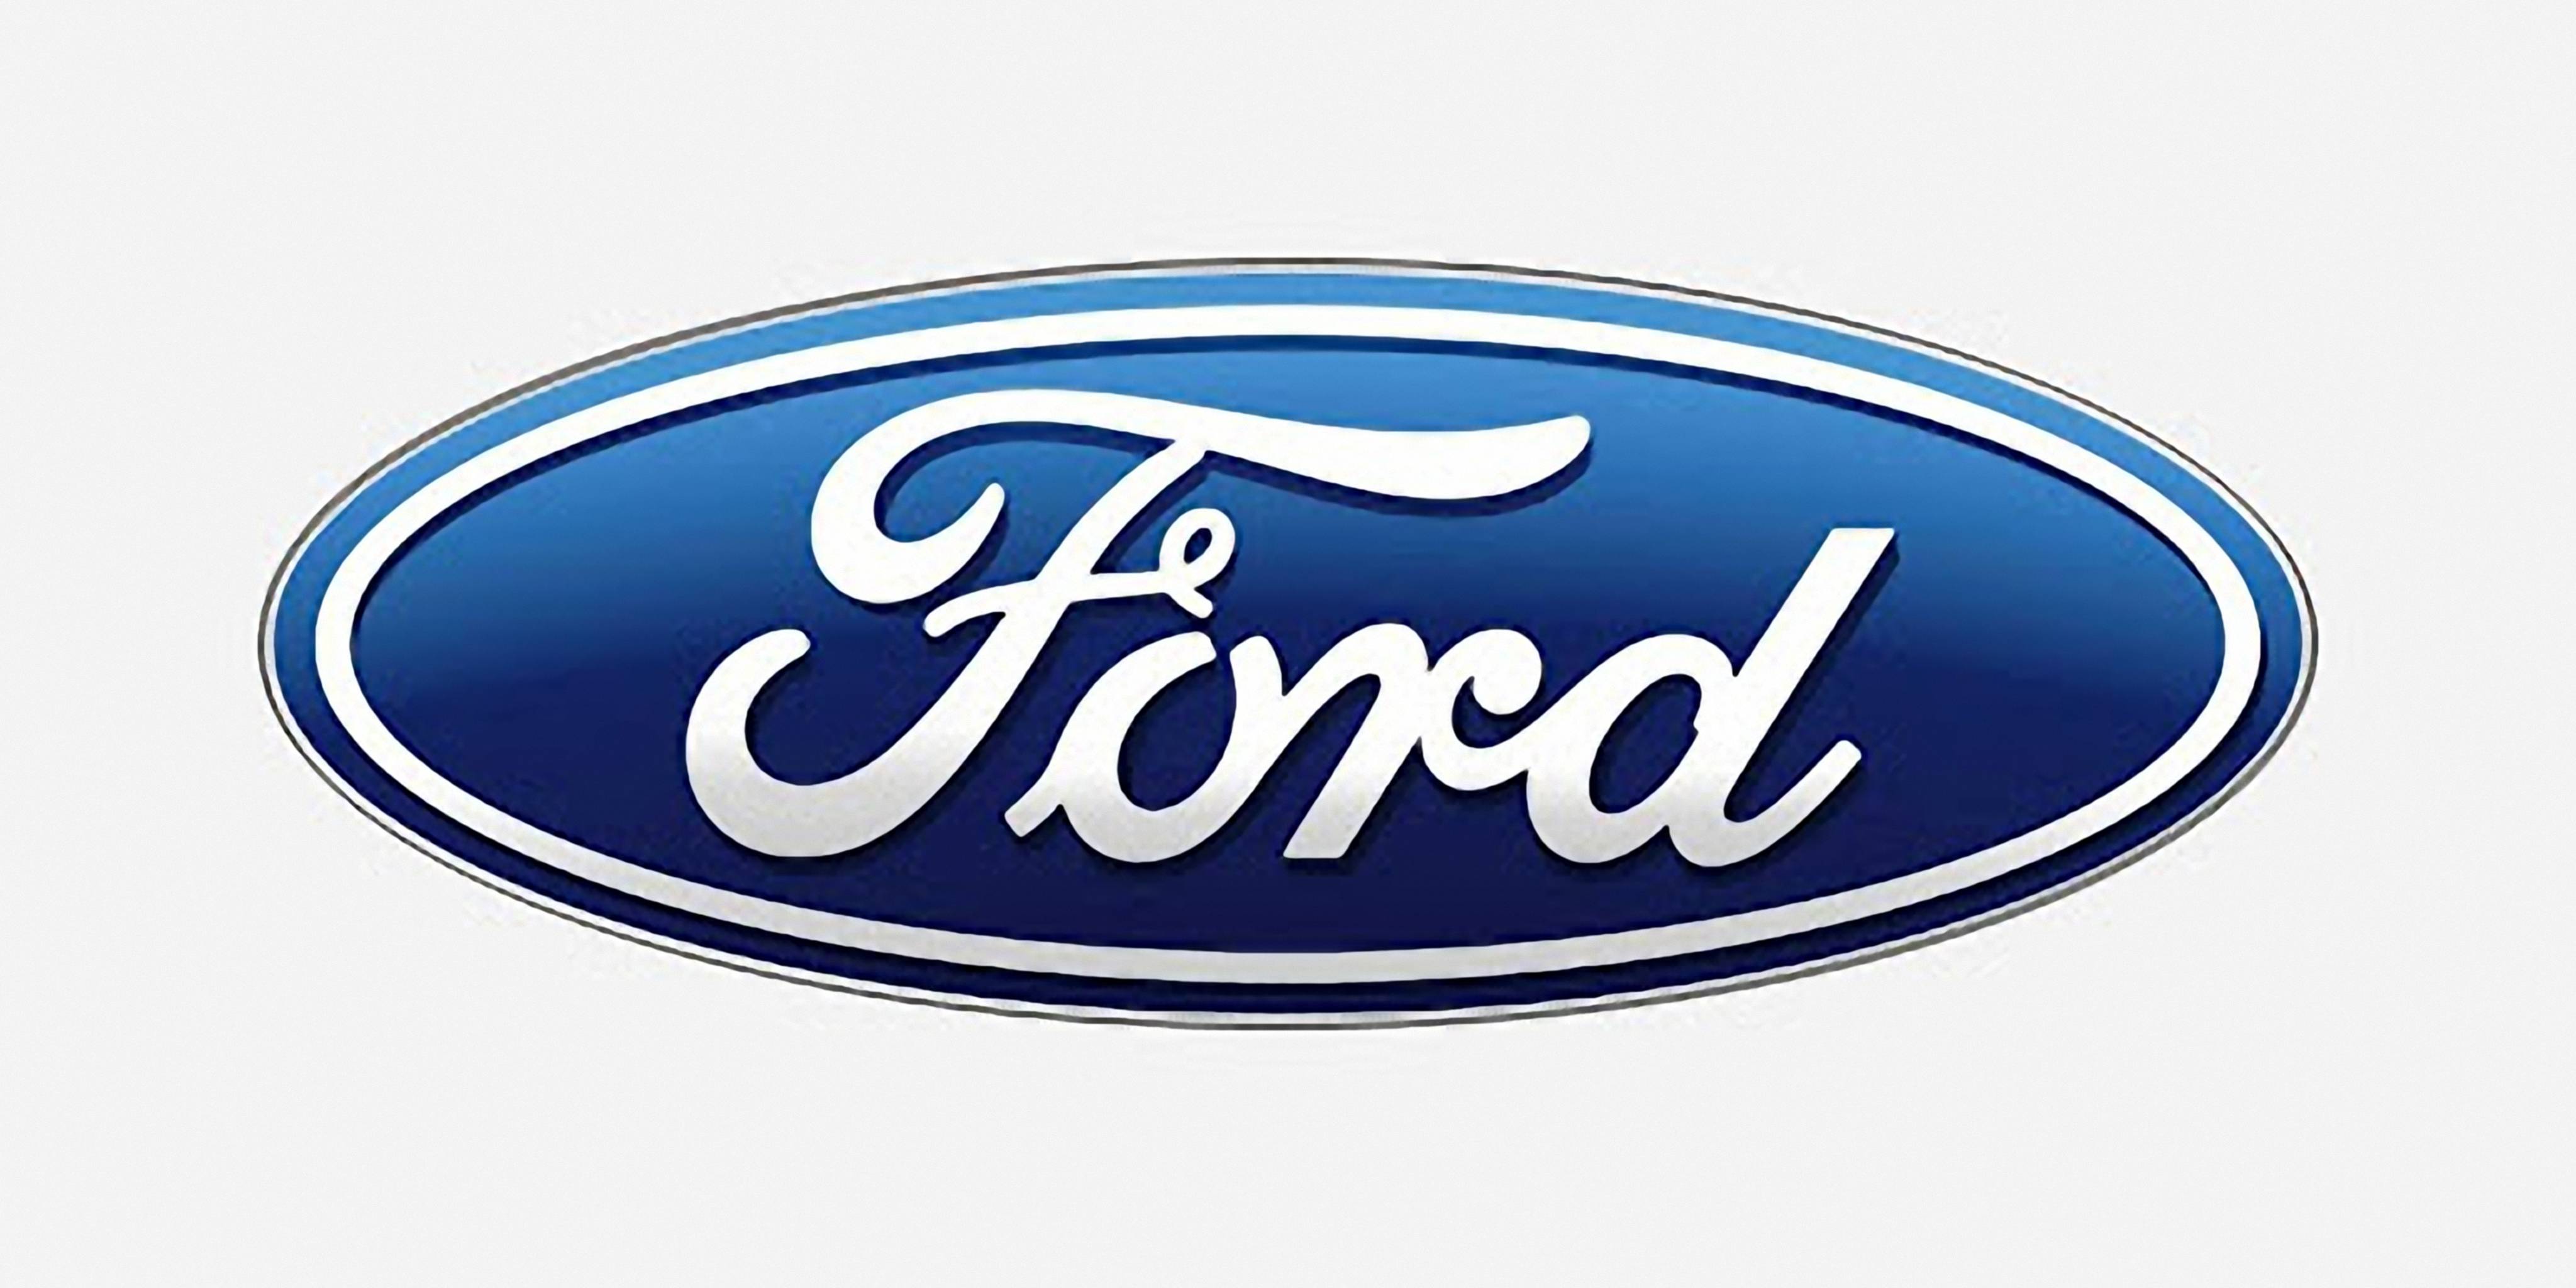 static wallpapers ford logo wallpapersposted on  june 5, 2019